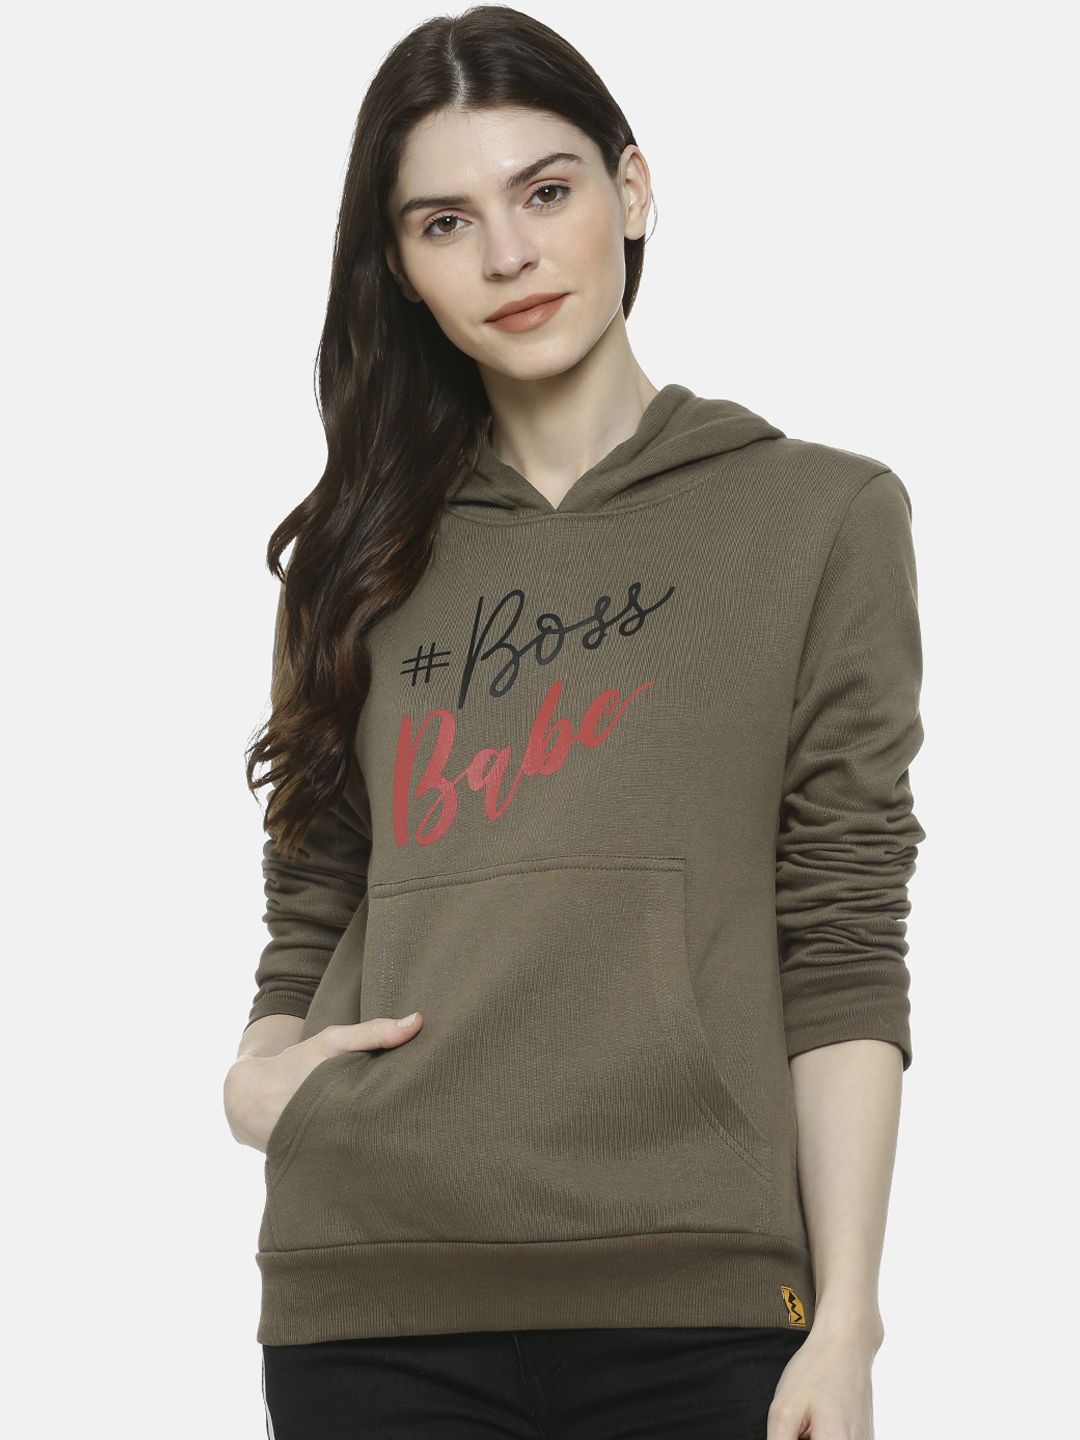 Campus Sutra Women Olive Green & Red Printed Hooded Sweatshirt Price in India